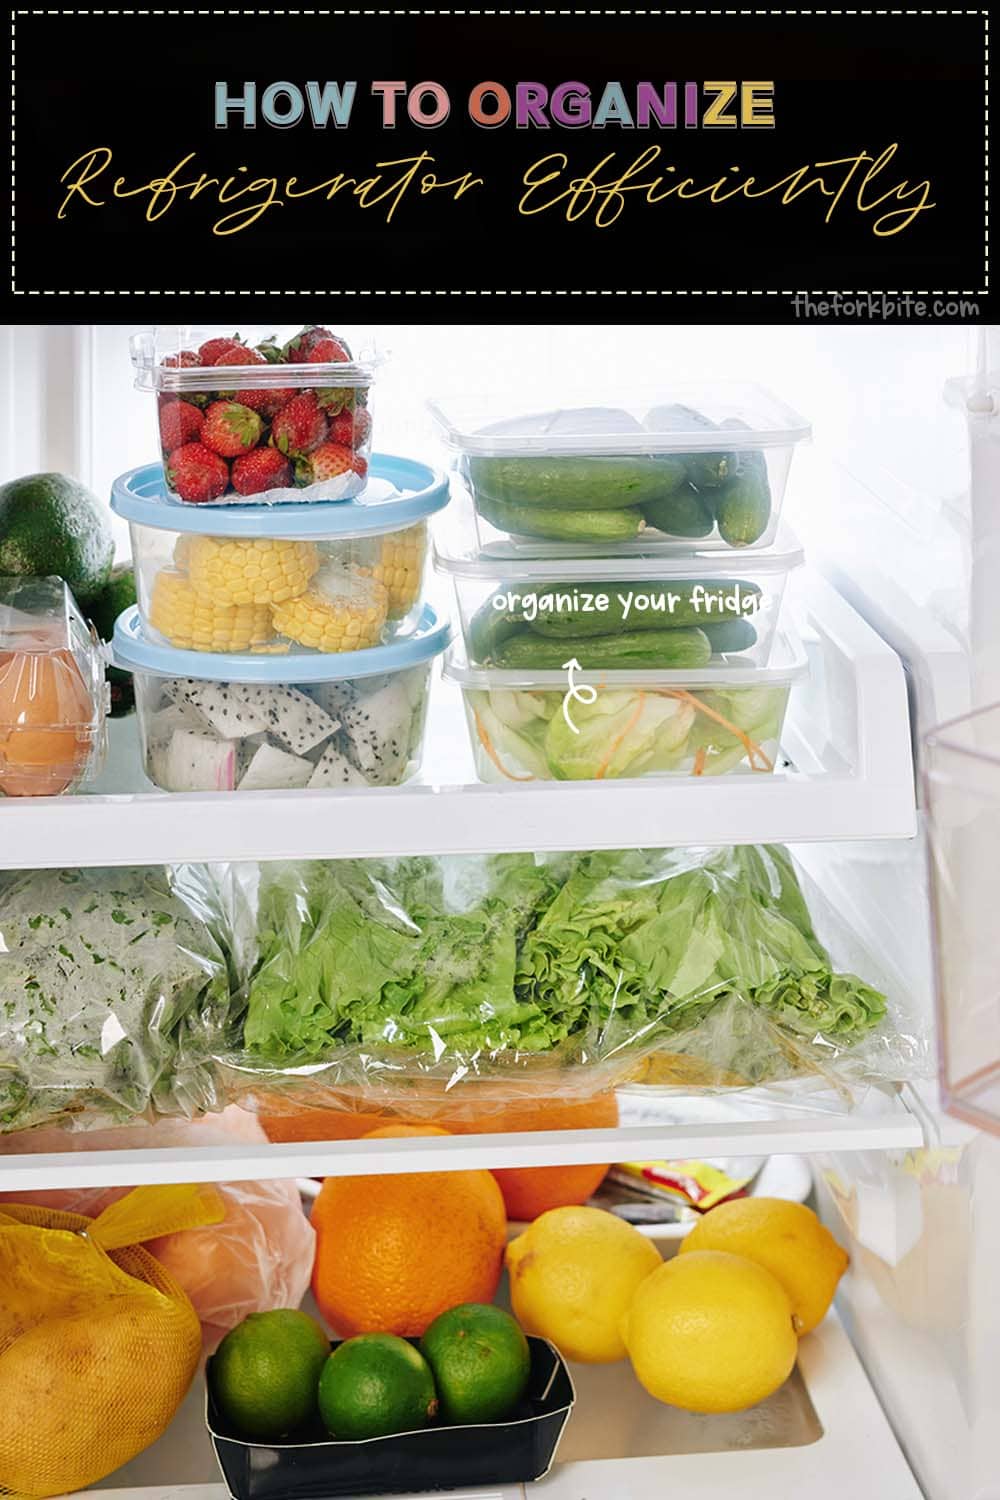 The variation in temperatures is the reason a fridge has different zones. The food you store in your fridge depends on how you know your refrigerator’s complete layout.